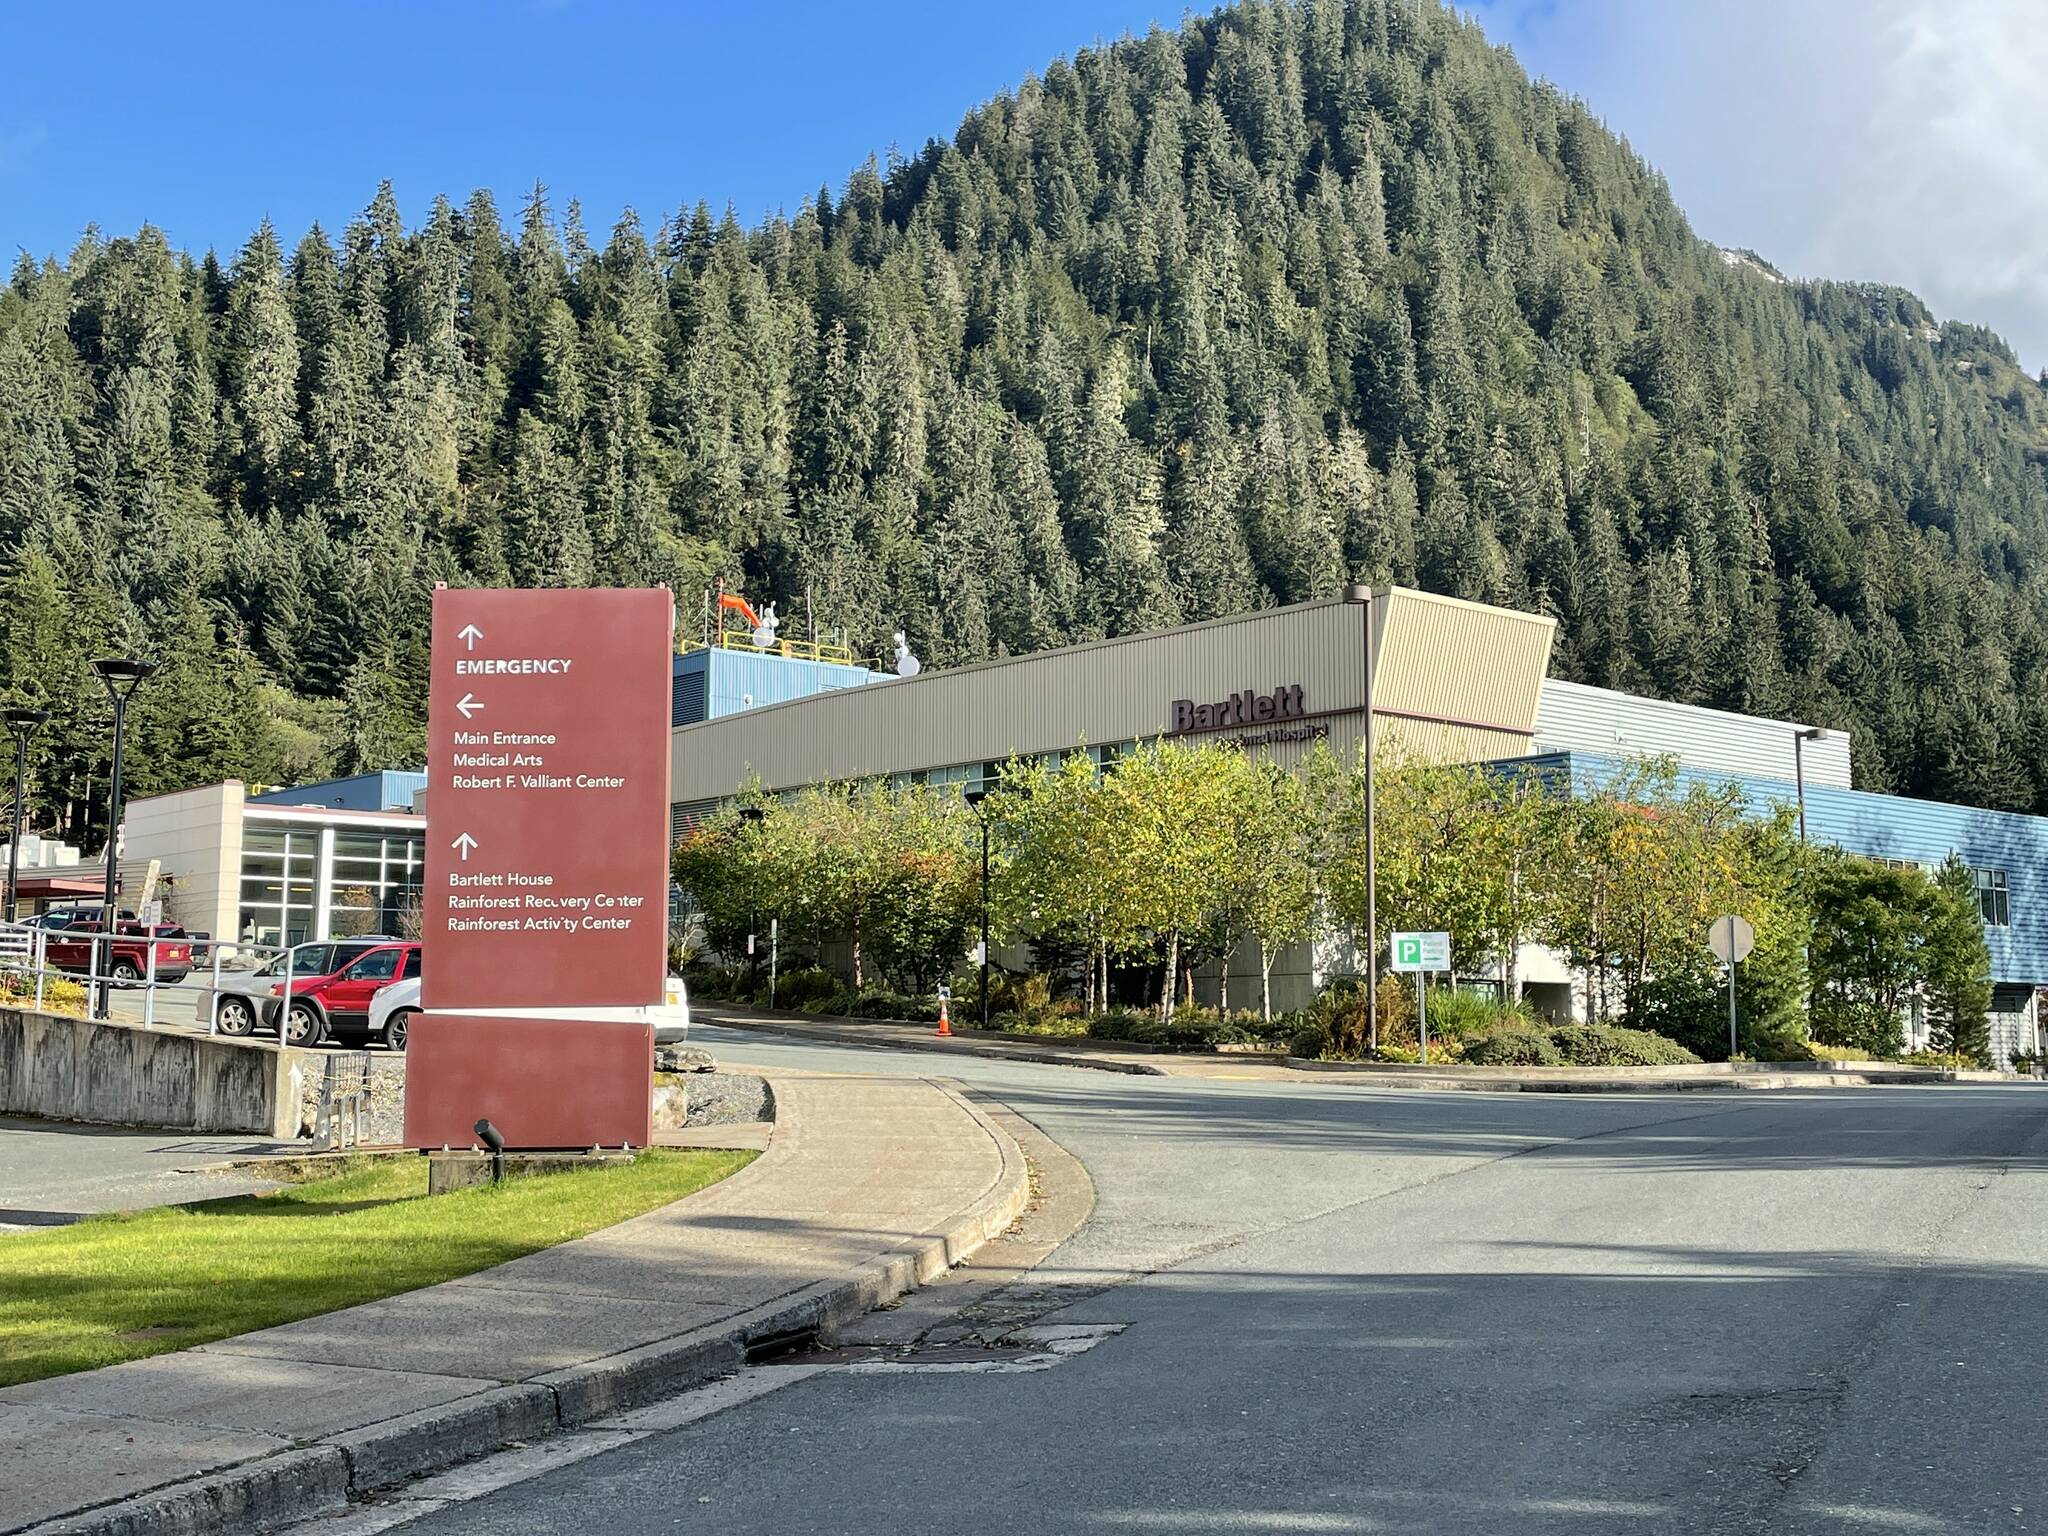 Bartlett Regional Hospital on Oct. 4. Jerel Humphrey will step into the top job at the hospital on Oct. 18. He’s the fourth Chief Executive Officer — and the third person to hold the position on an interim basis at the hospital this year. (Michael S. Lockett/Juneau Empire)